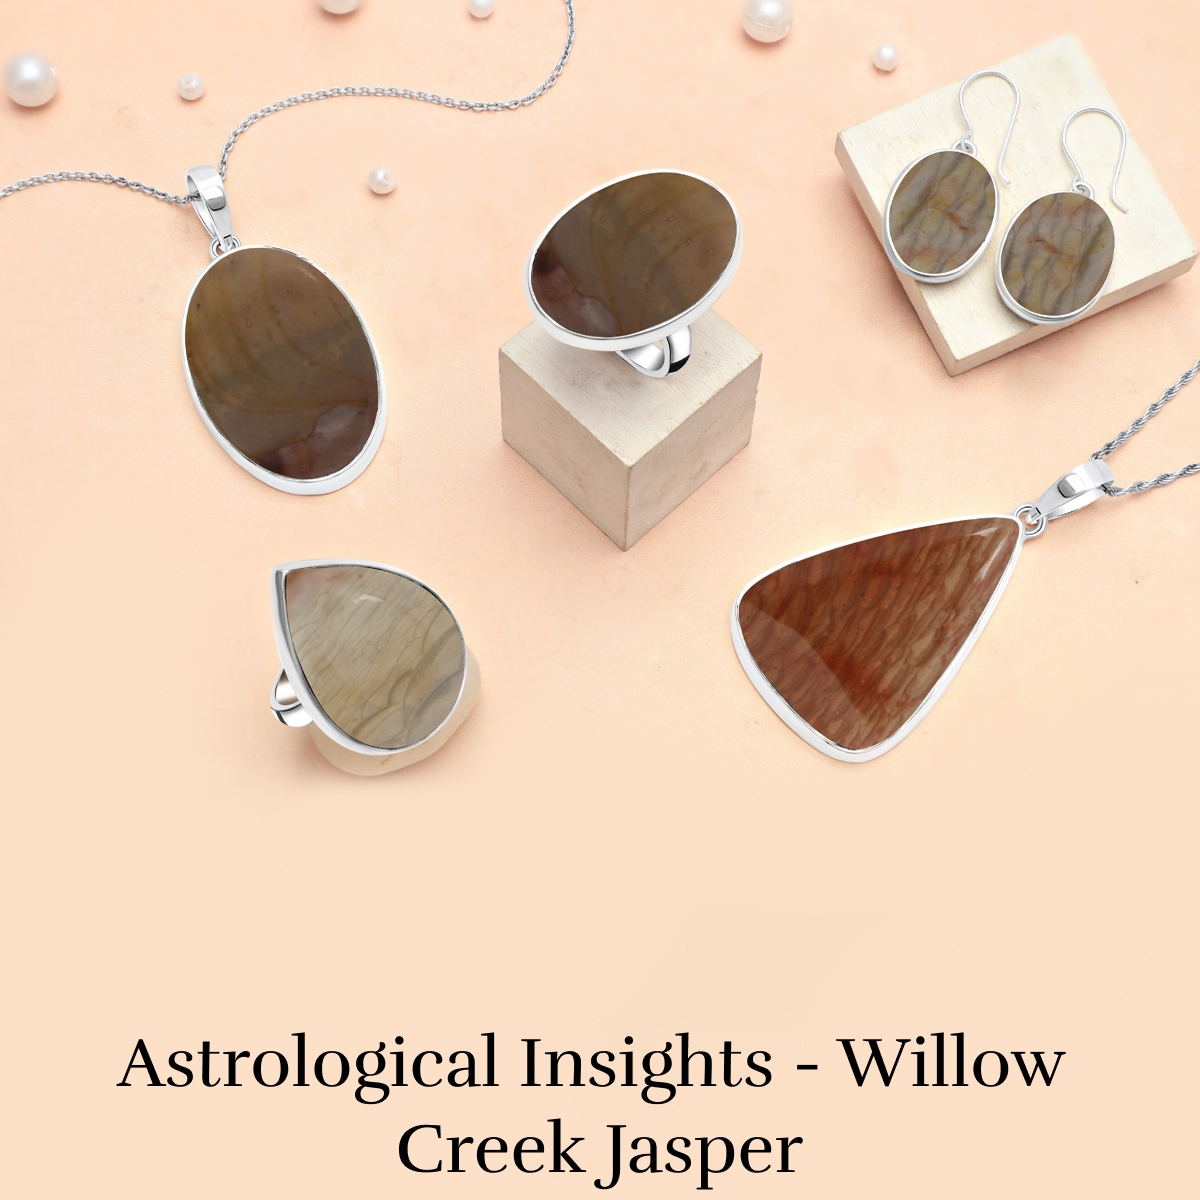 Willow Creek Jasper is Associated With Which Zodiac Sign